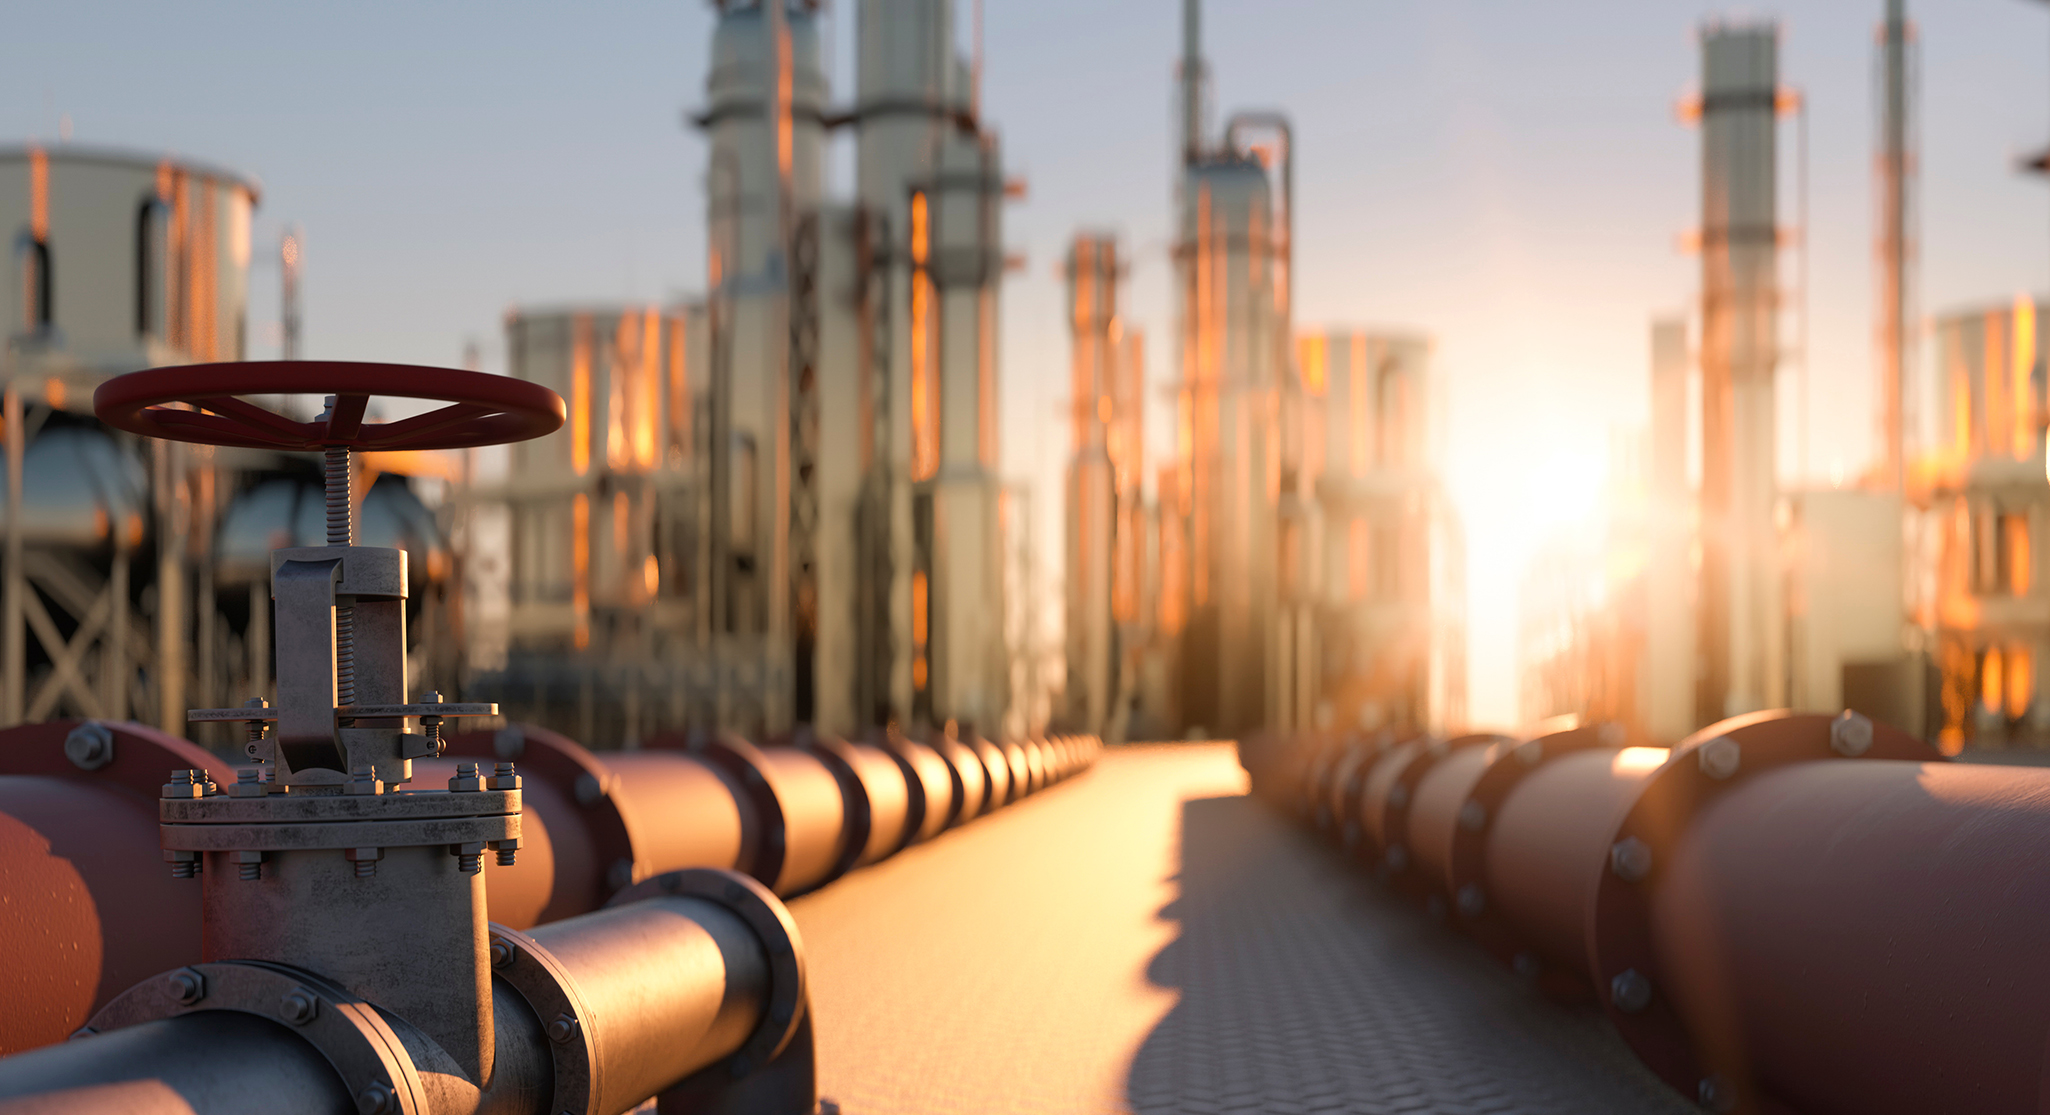 Large industrial gas pipelines in a modern refinery at sunrise 3d render